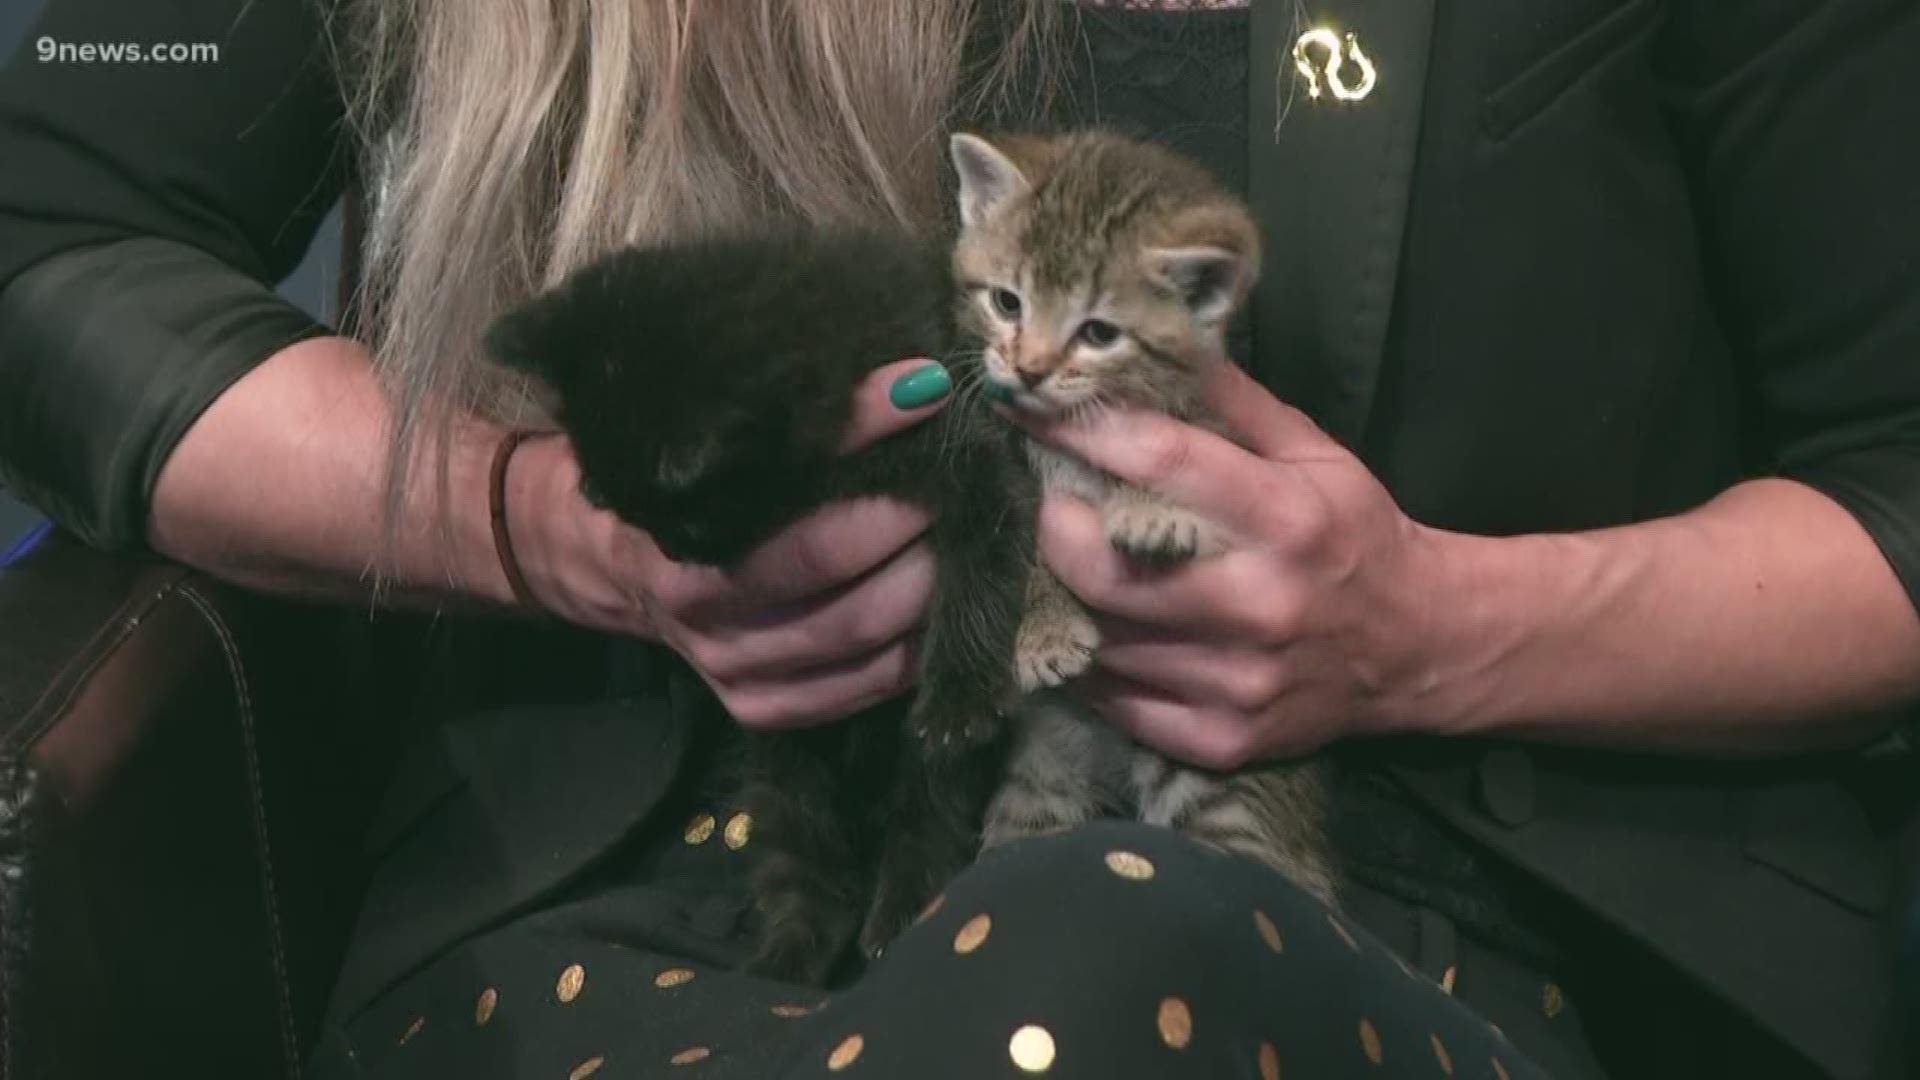 These two tiny visitors are only 4 weeks old and are little bundles of energy. Contact Rocky Mountain Feline Rescue or call (303) 751-5557 to meet them!